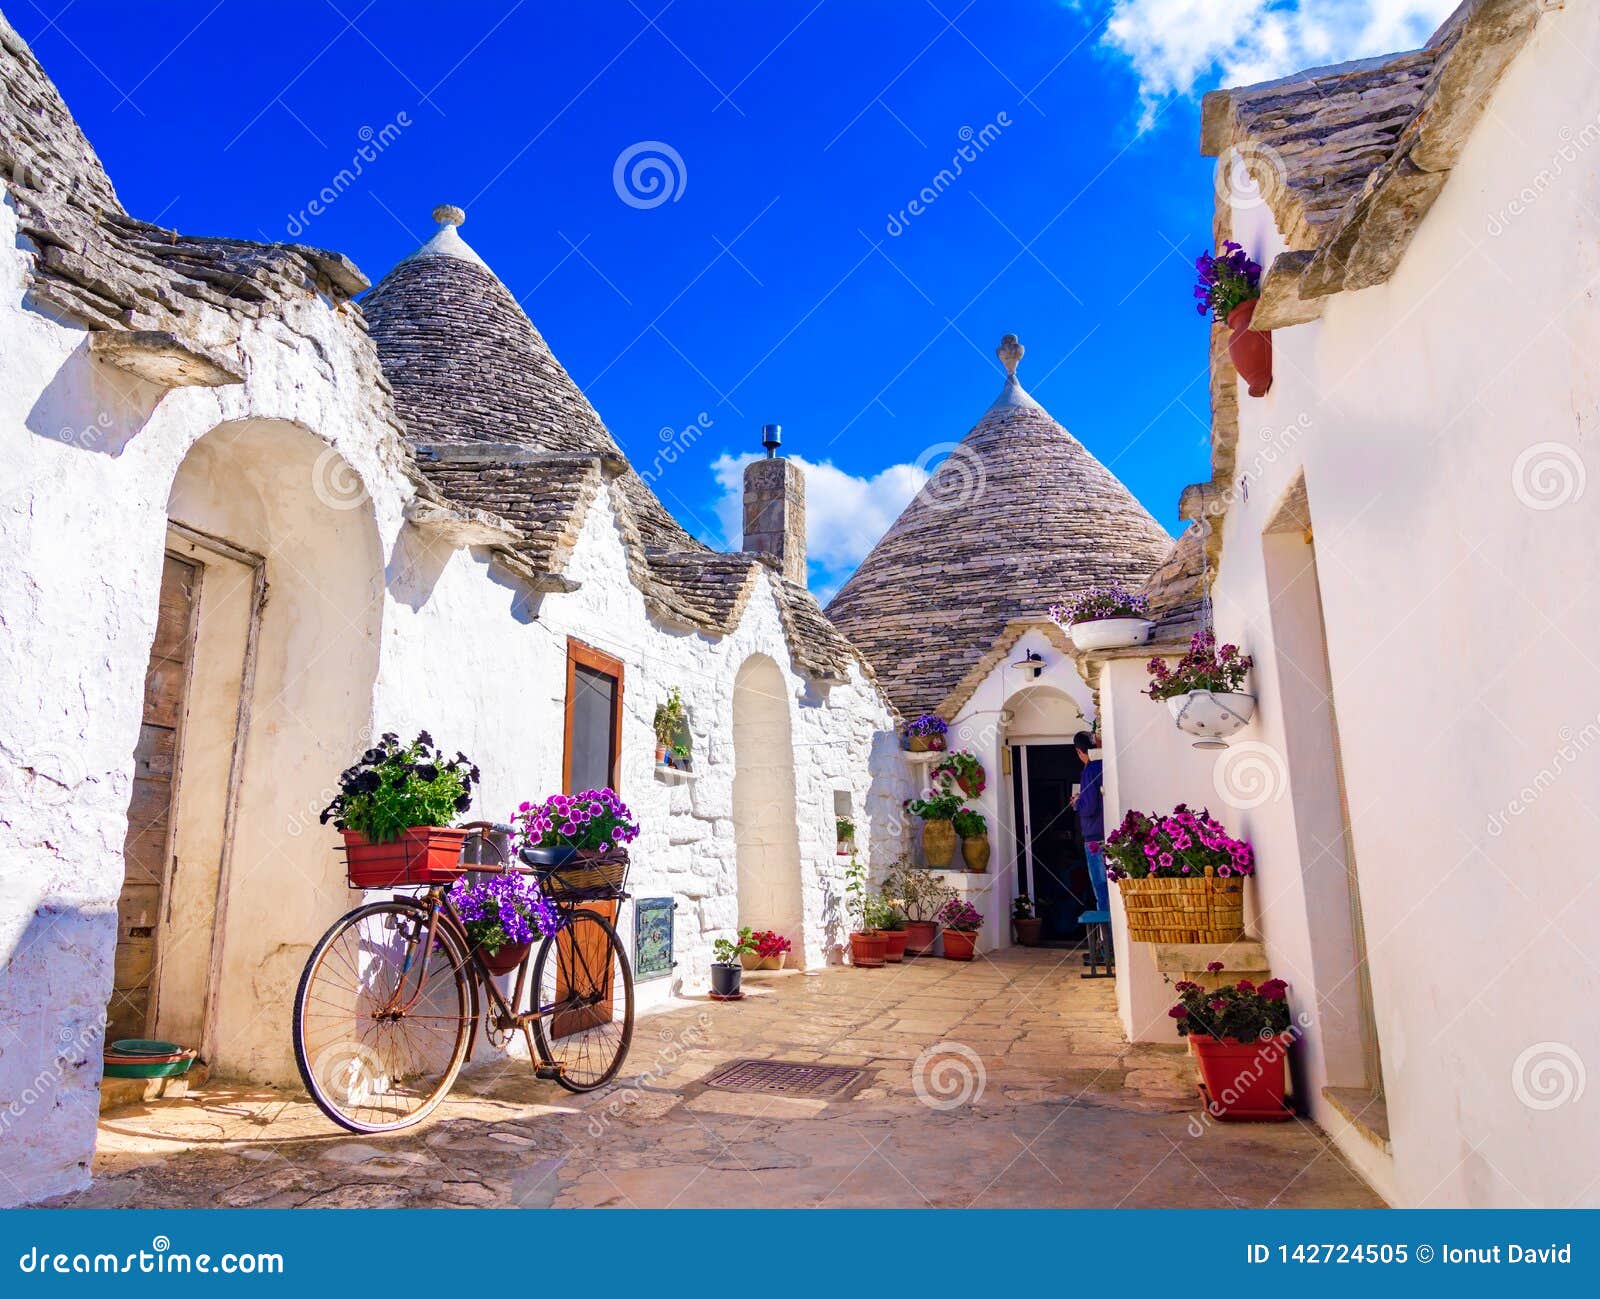 alberobello, puglia, italy: typical houses built with dry stone walls and conical roofs